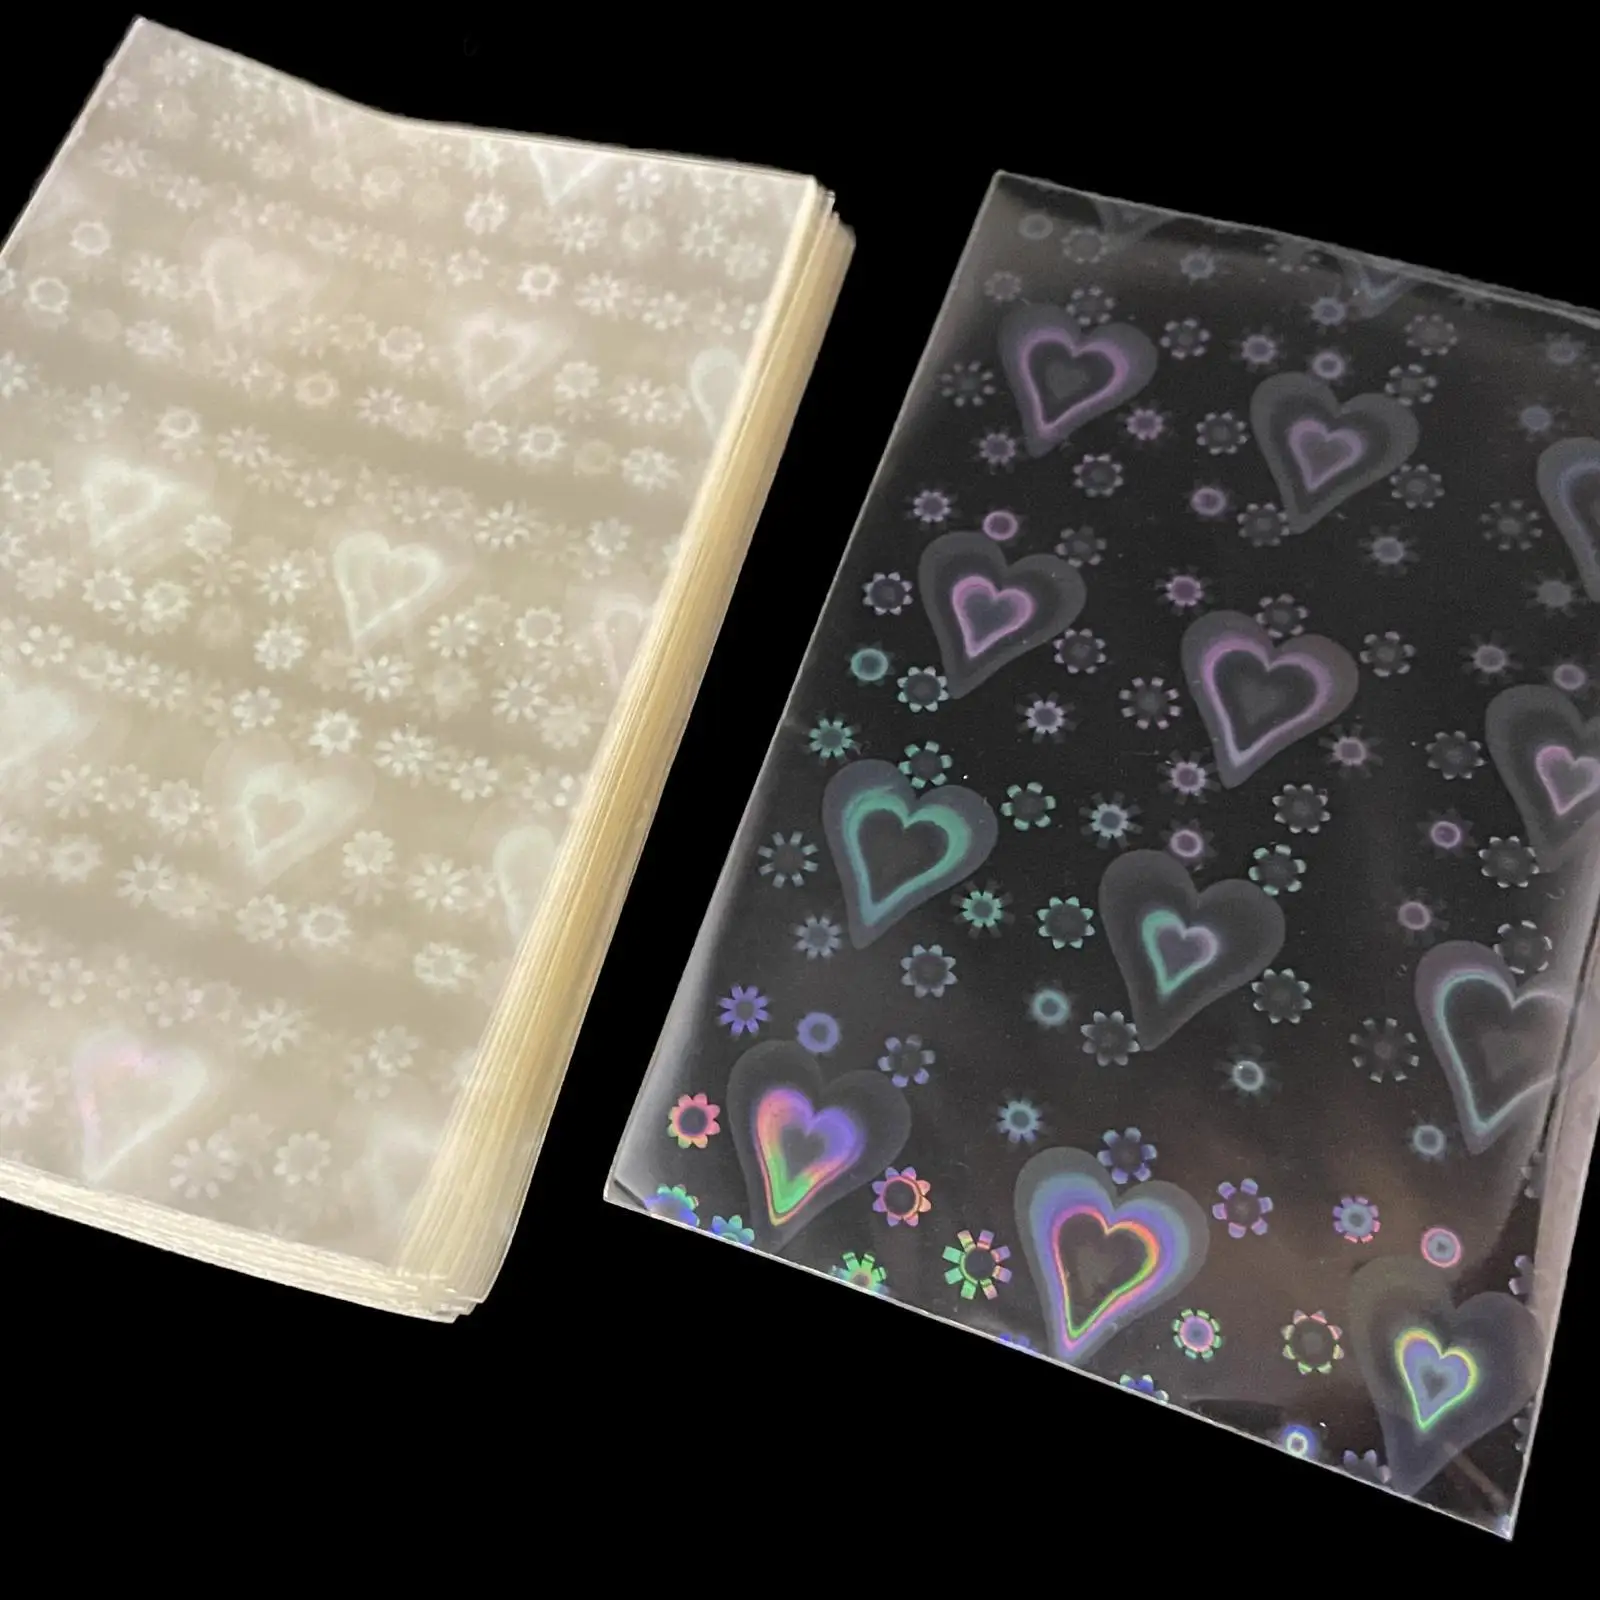 100Pcs Holographic Card Sleeves Cards Guard Sleeve Standard Size Board Game Trading Card Sleeves 61x88mm 57x88mm